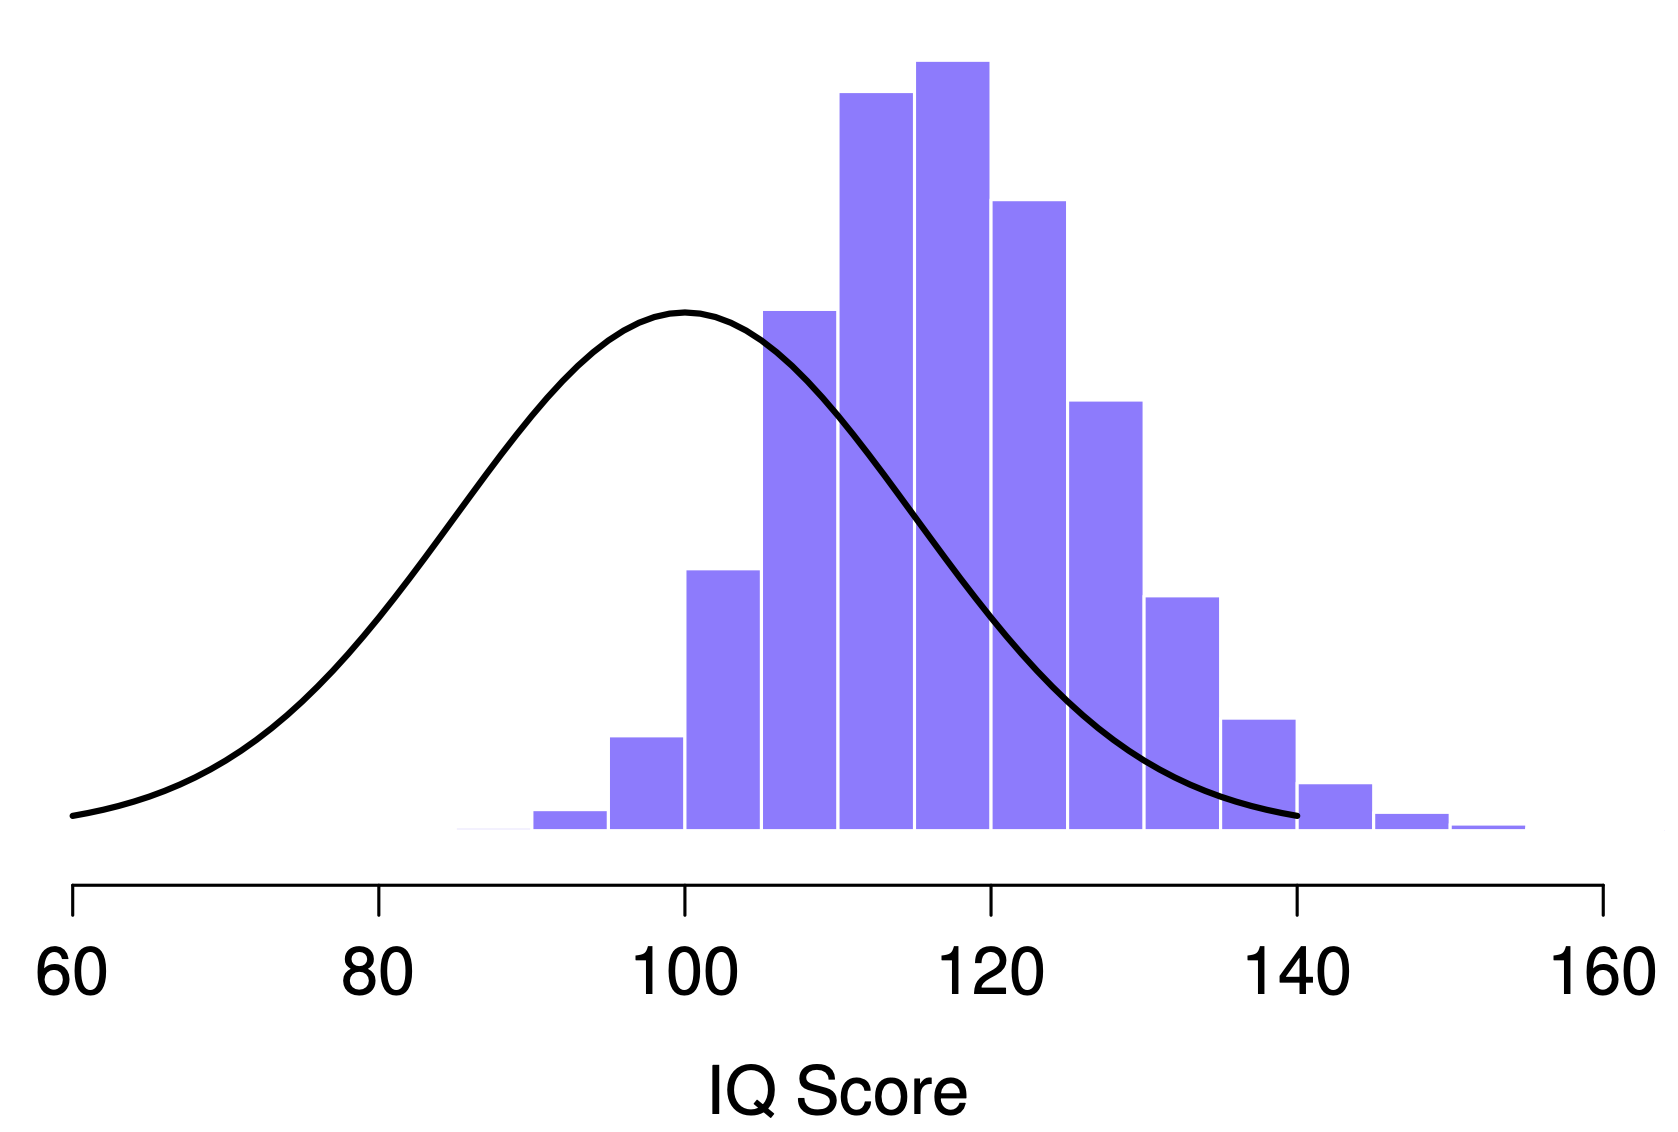 The sampling distribution of the maximum for the “five IQ scores experiment”. If you sample 5 people at random and select the one with the highest IQ score, you’ll probably see someone with an IQ between 100 and 140.